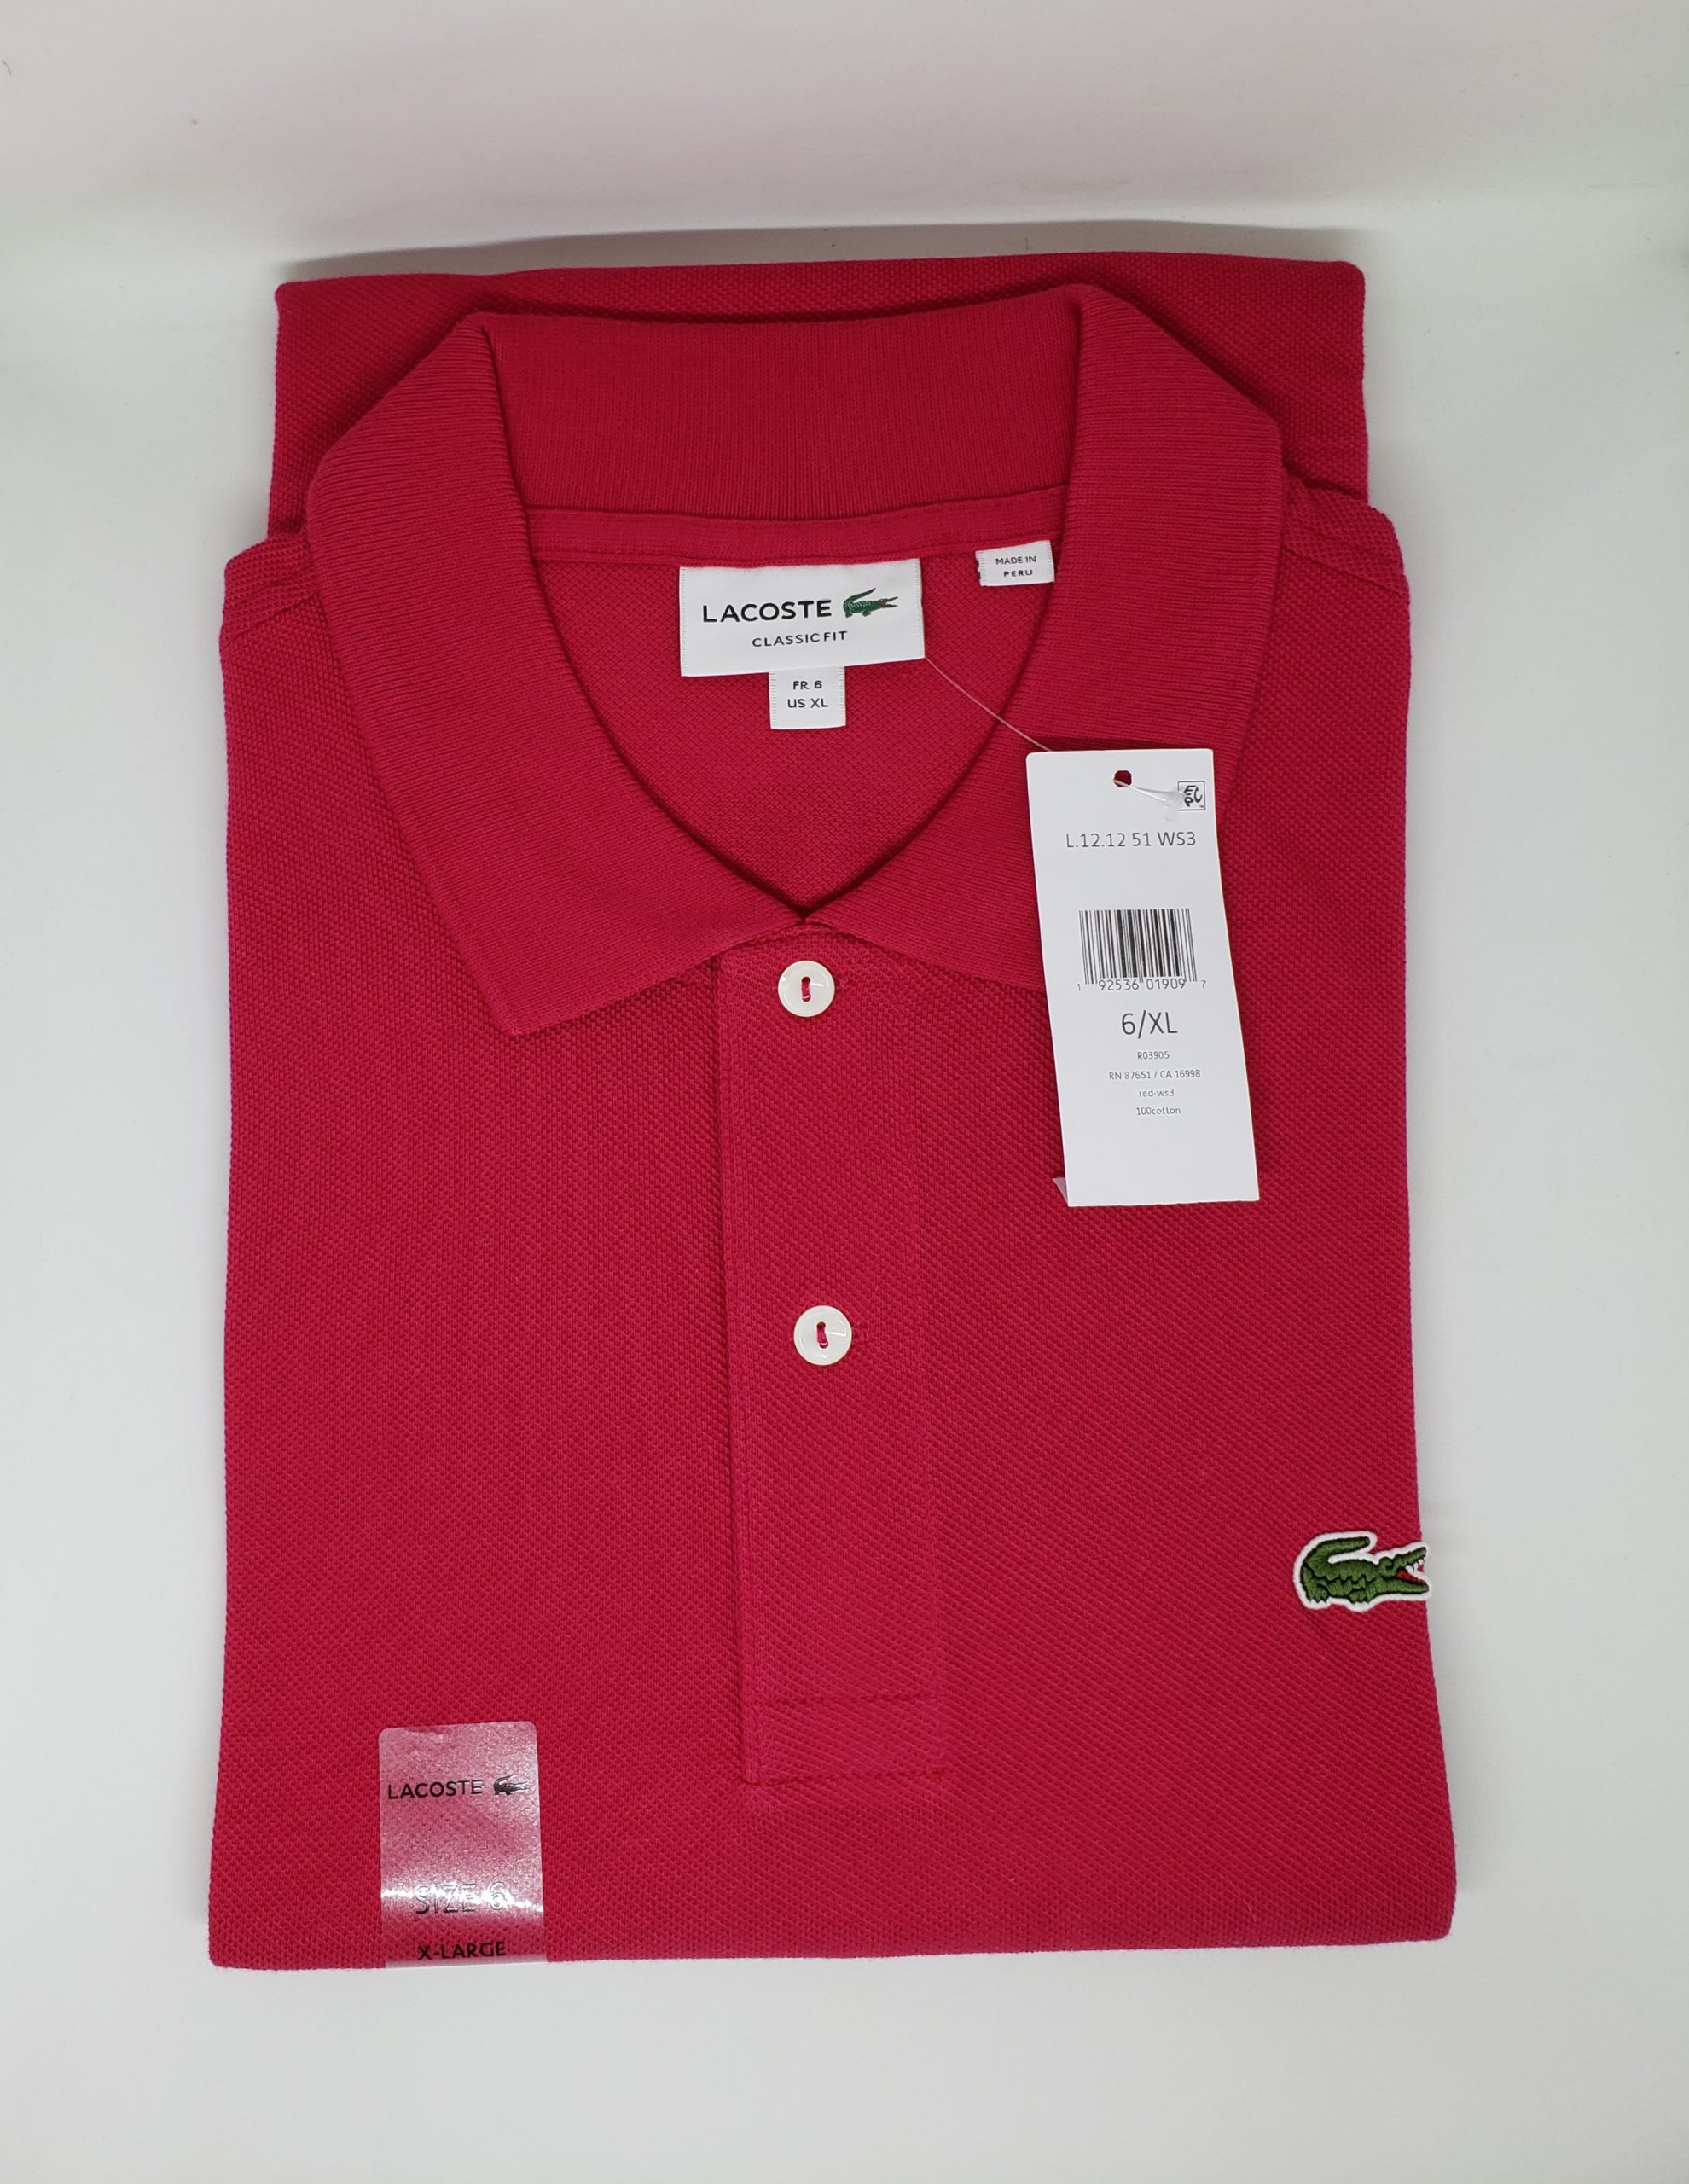 Koncession sekvens illoyalitet Lacoste Clasic Fit Polo Shirts 100% cotton. - SNSGIFTS4ALL